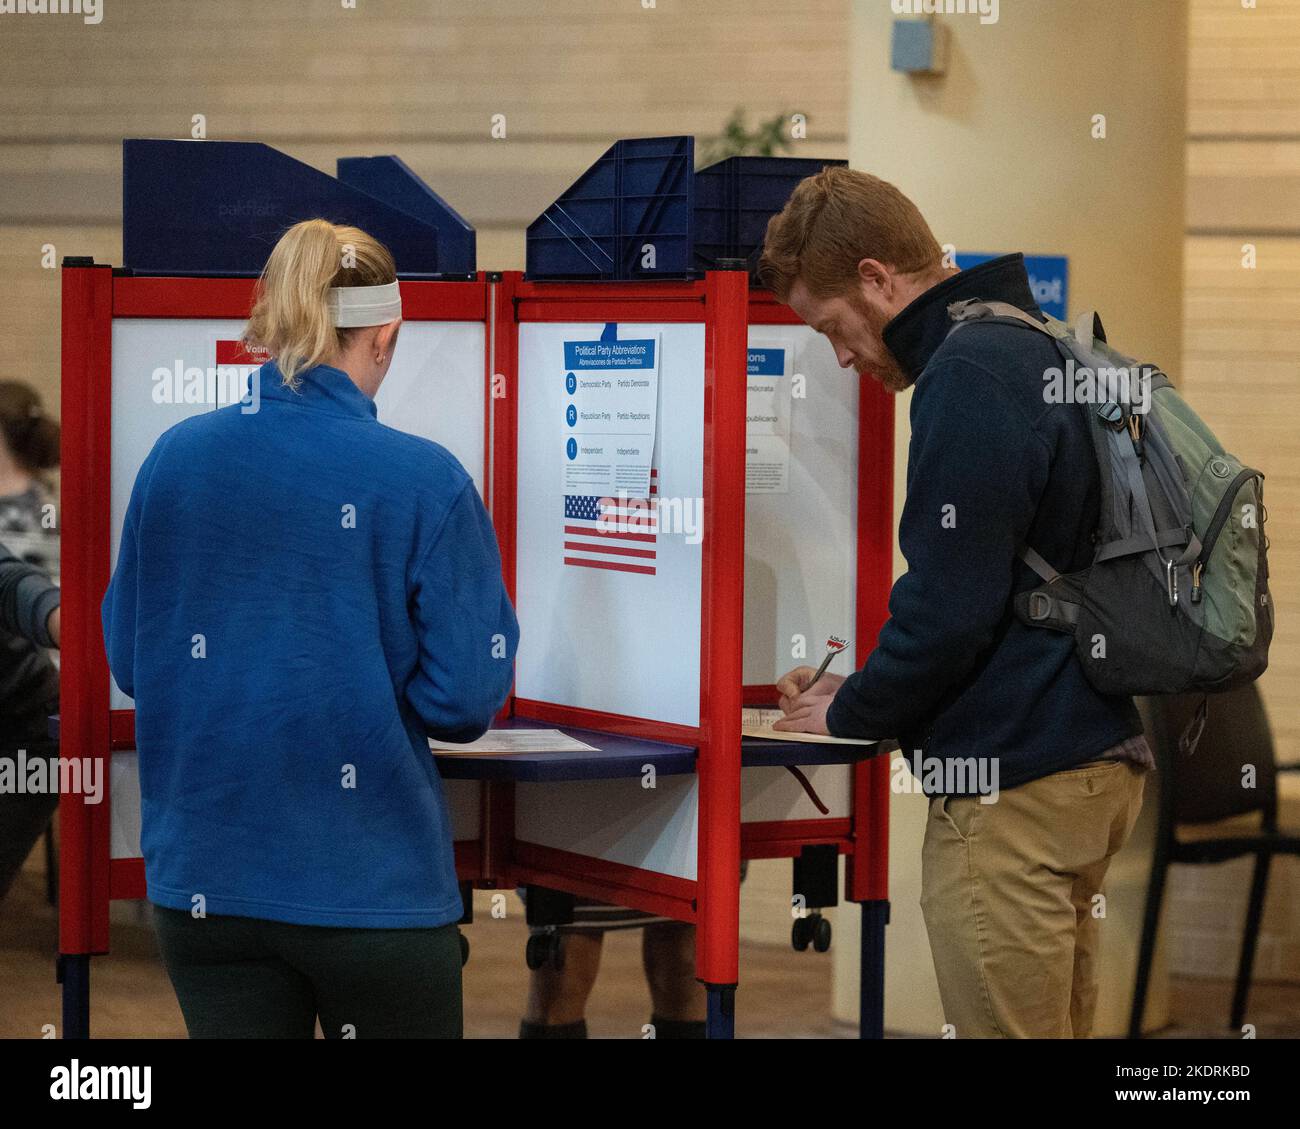 Arlington, USA. 8th Nov, 2022. Voters fill in their ballots during the U.S. midterm elections at a polling station in Arlington, Virginia, the United States, Nov. 8, 2022. Concerned voters across the United States are going to the polls to cast their ballots in the 2022 midterm elections on Tuesday amid heightened partisanship and divide. Credit: Liu Jie/Xinhua/Alamy Live News Stock Photo